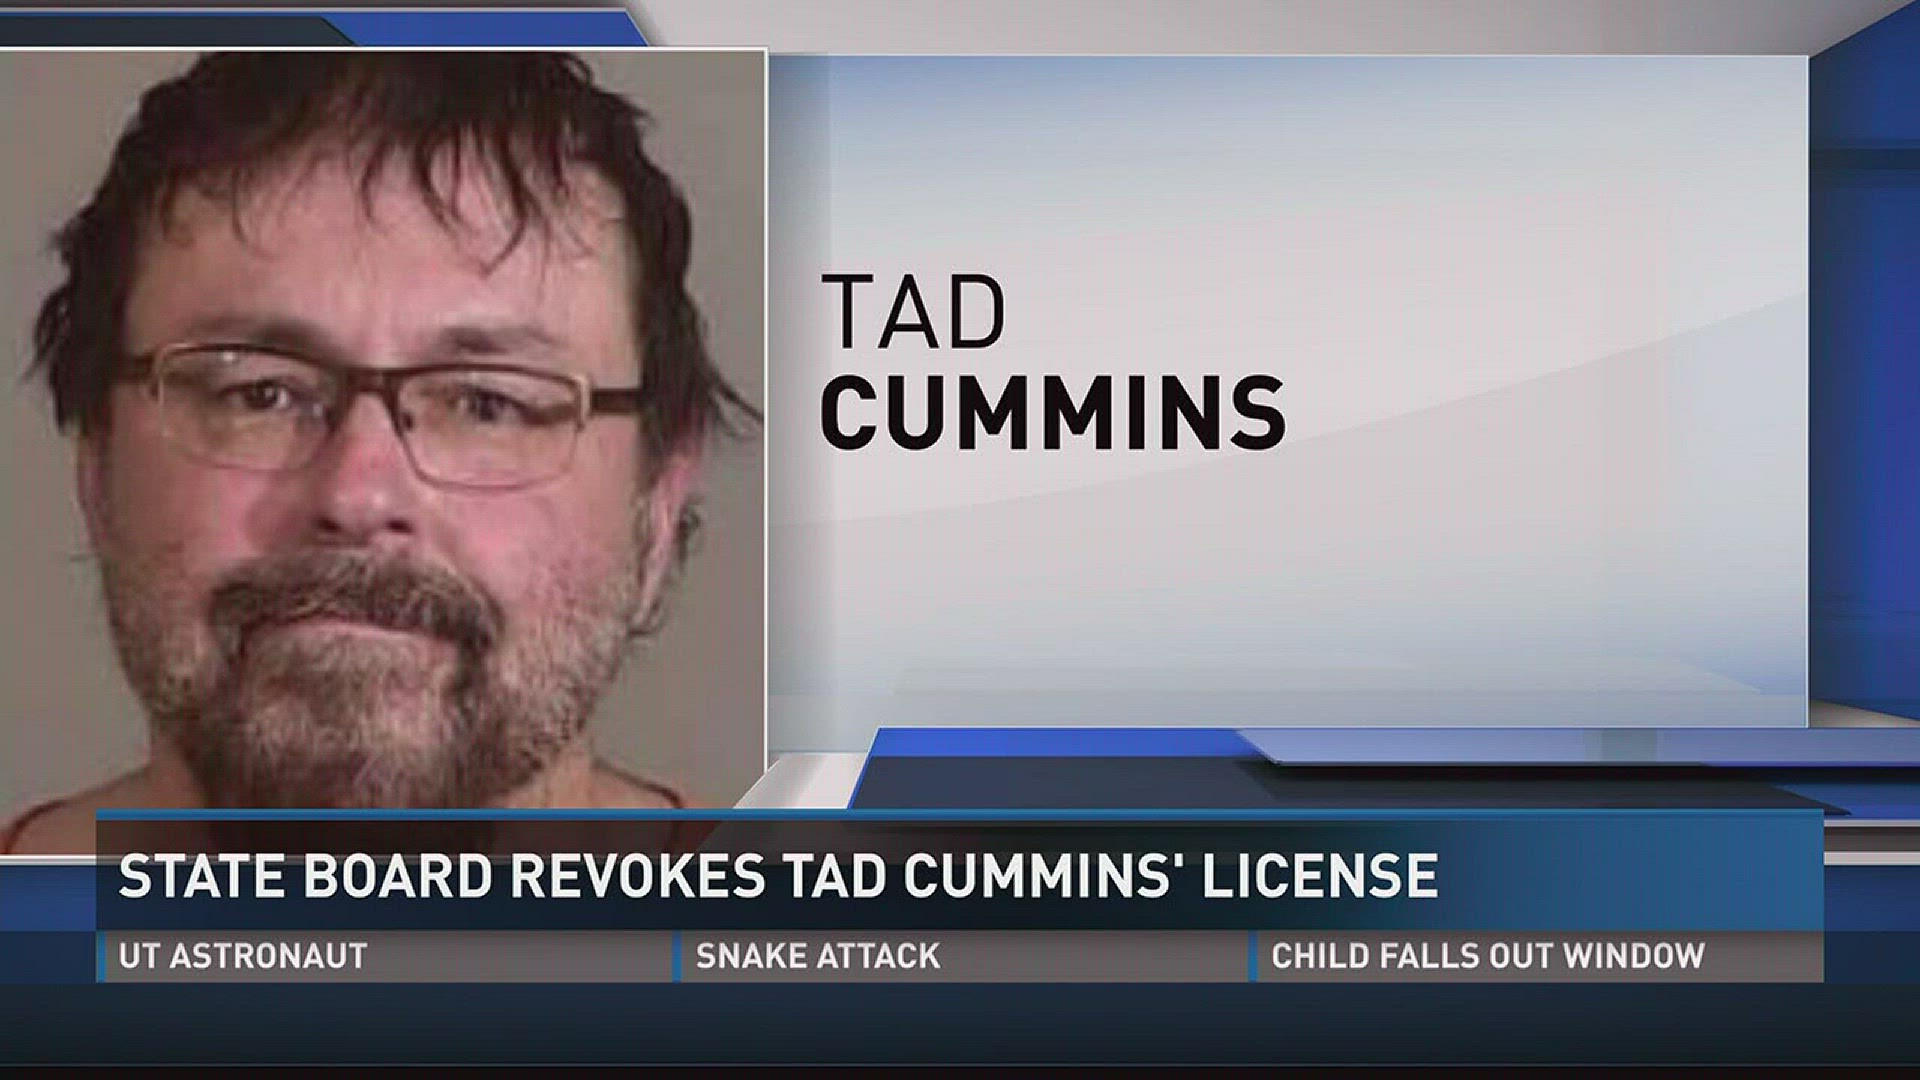 July 28, 2017: The State Board of Education revoked the license of Maury County educator Tad Cummins.